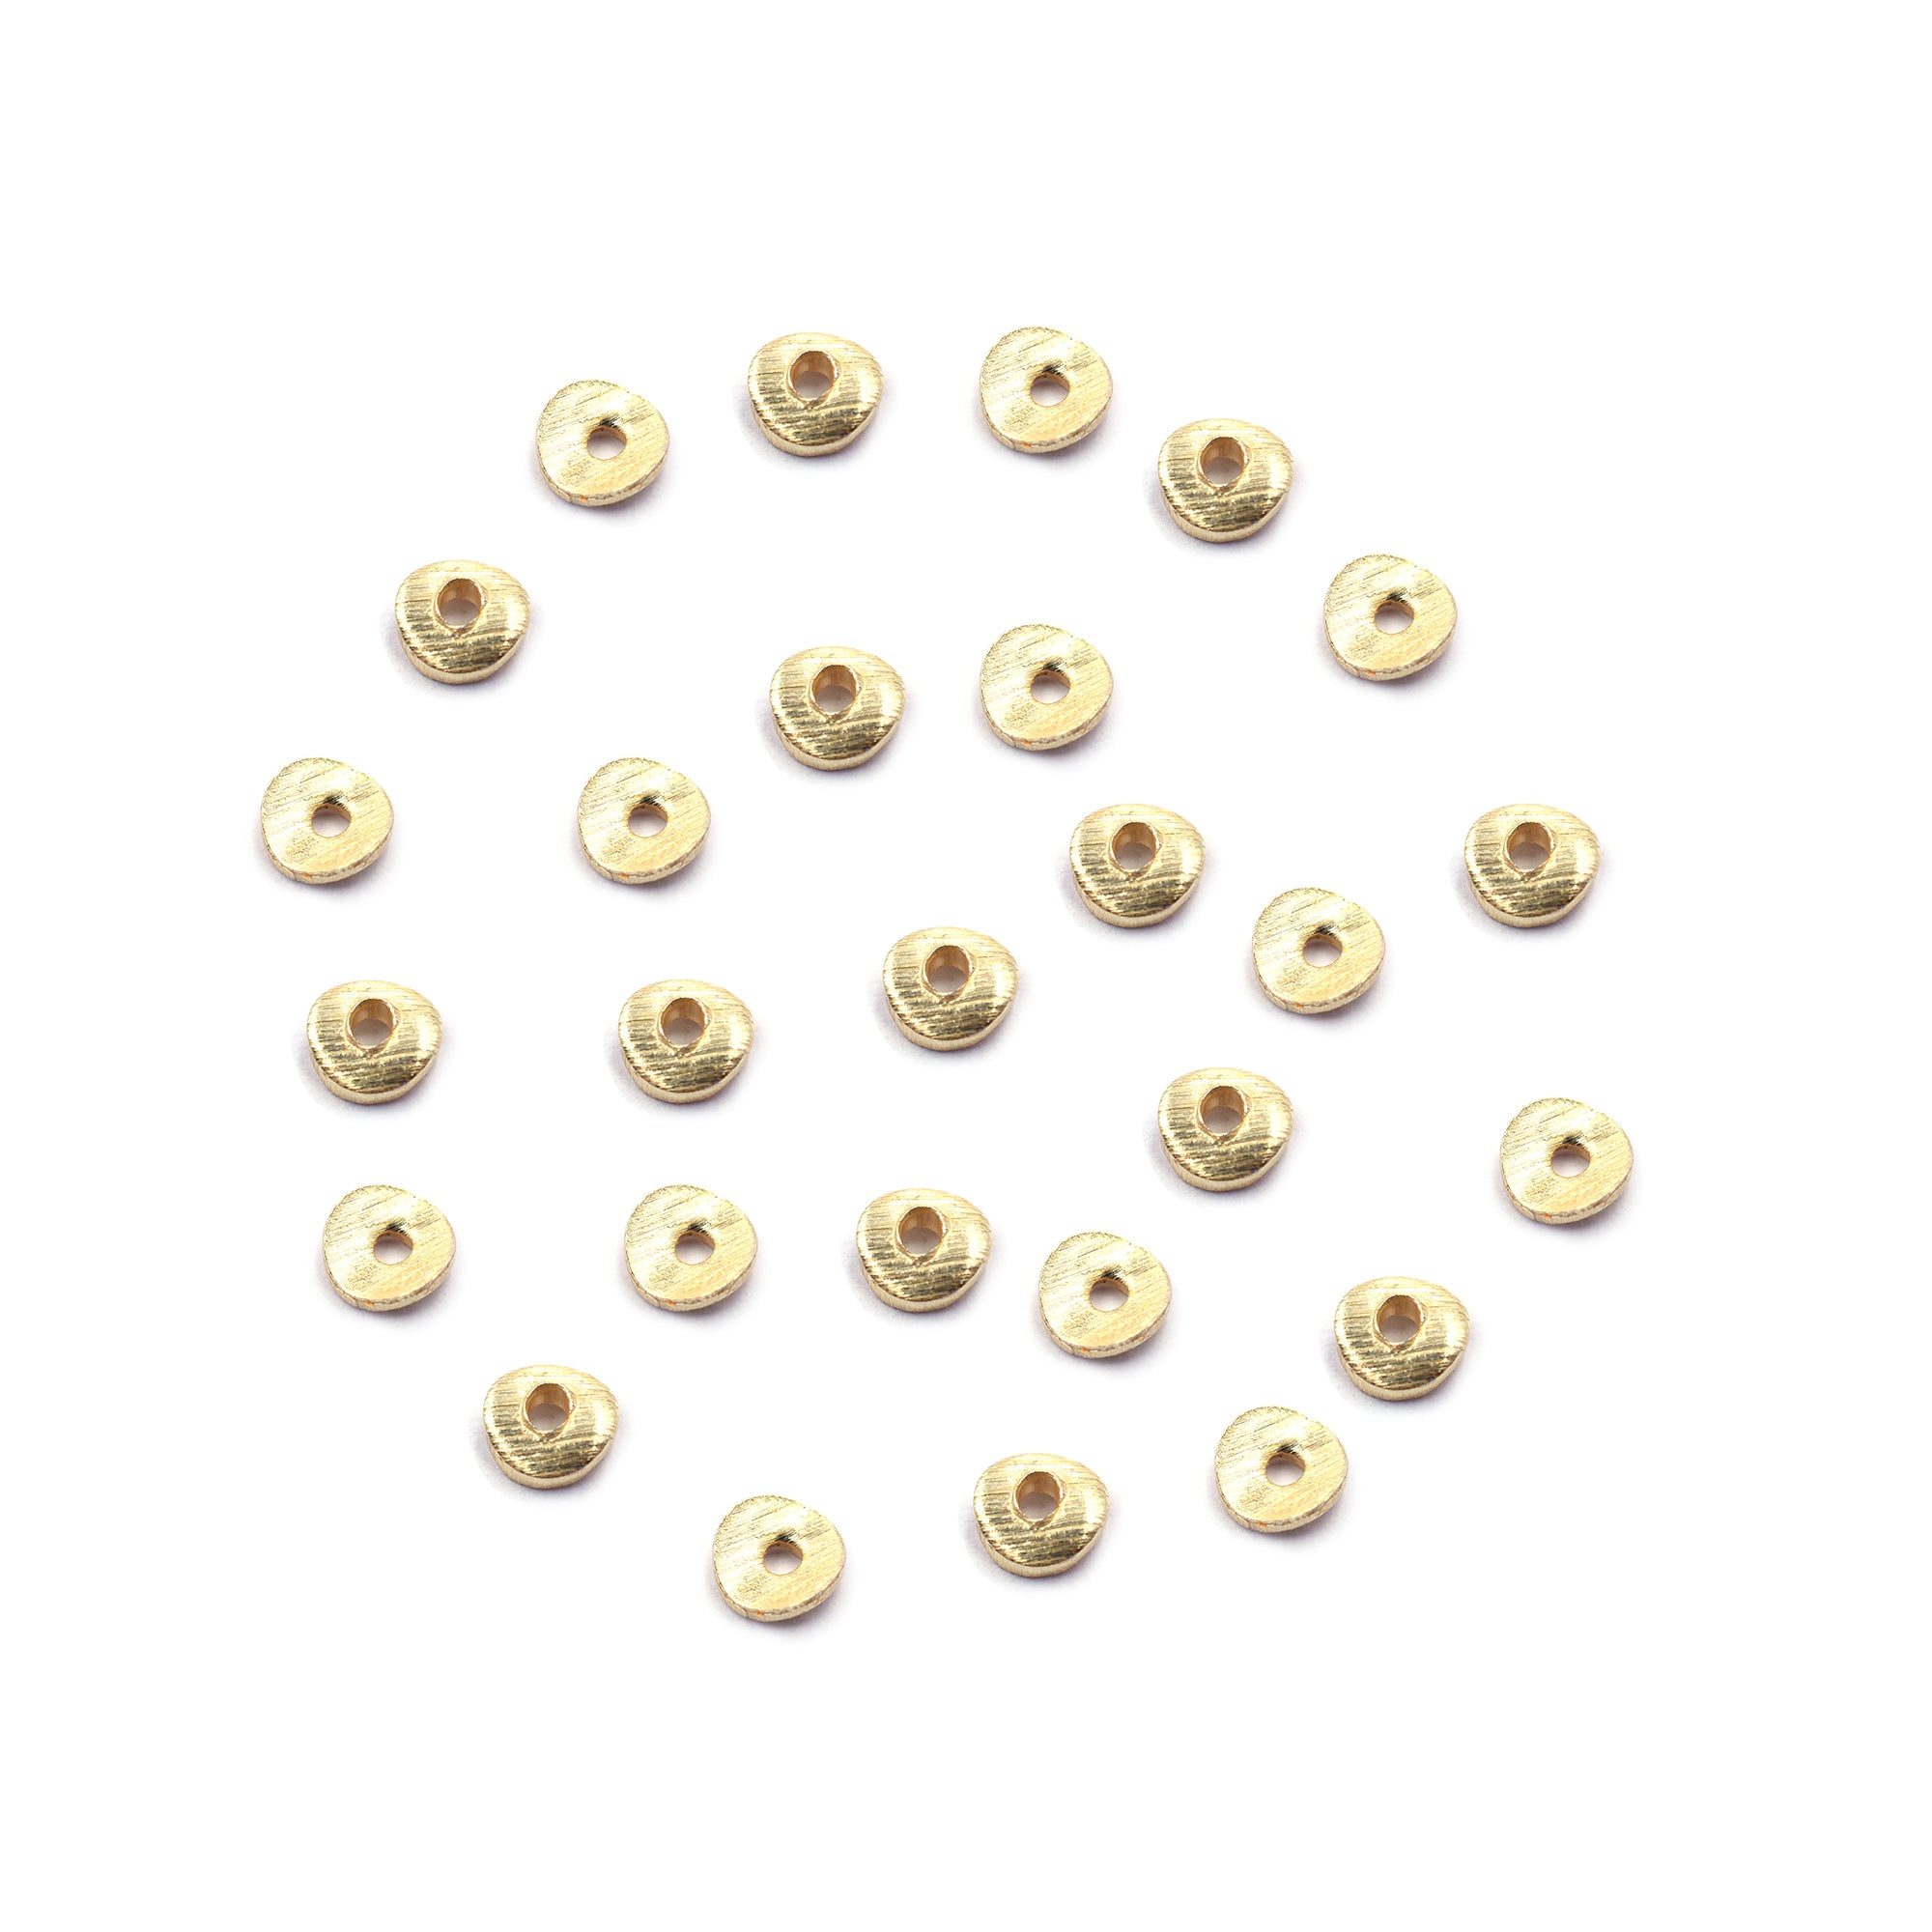 160 Pcs 4mm Wavy Disc Brushed Matte Finish Beads Gold Plated Copper